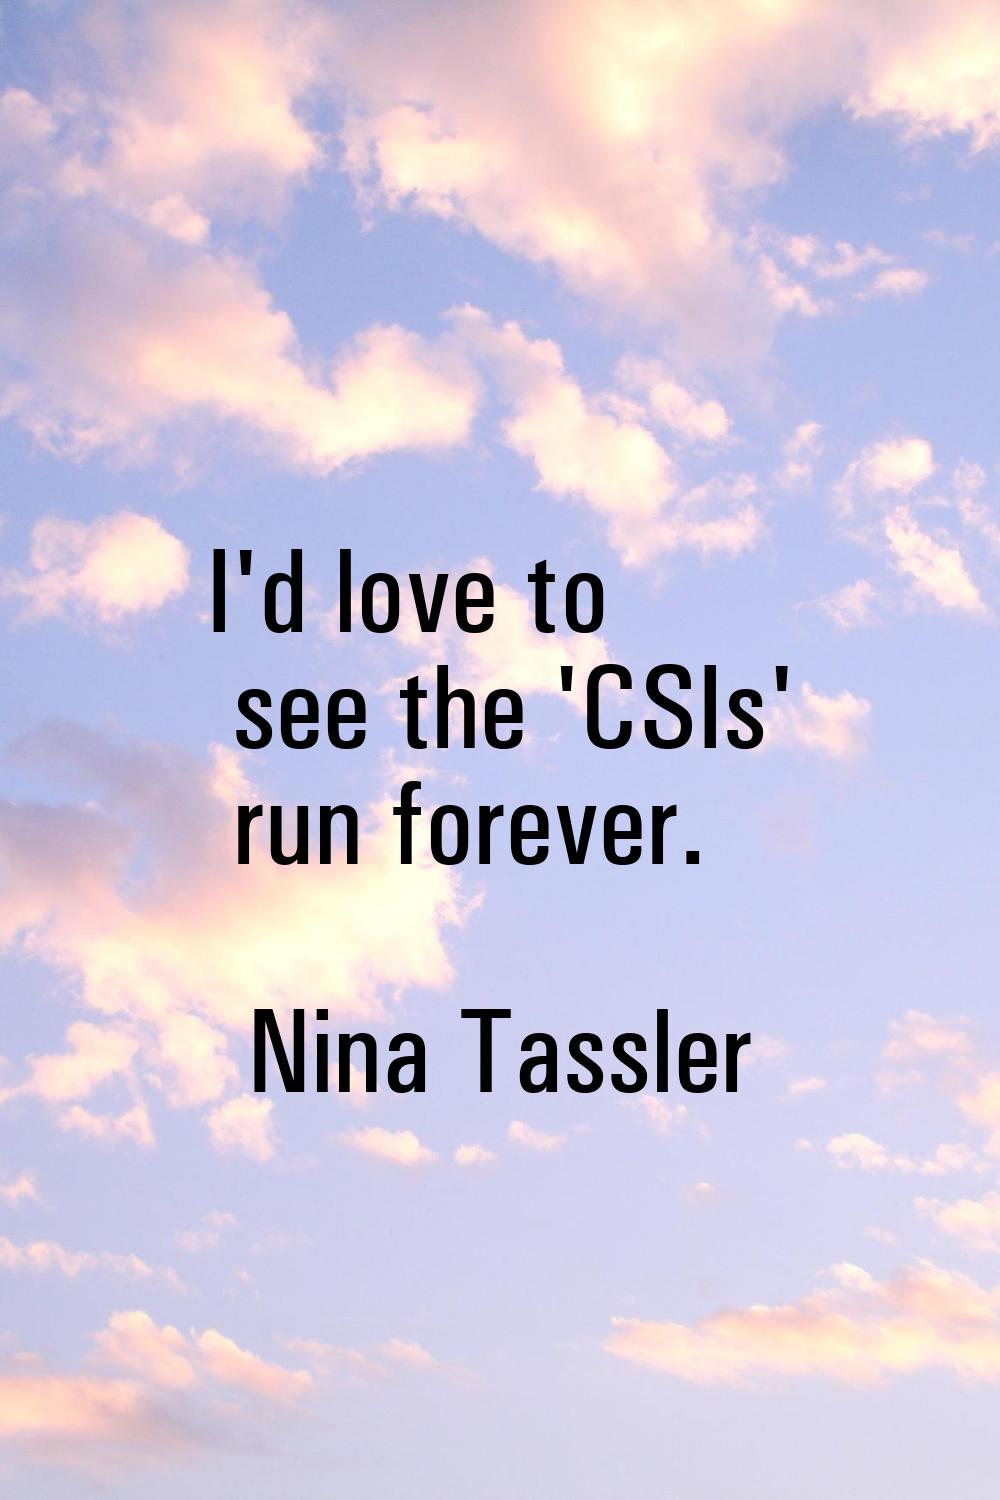 I'd love to see the 'CSIs' run forever.